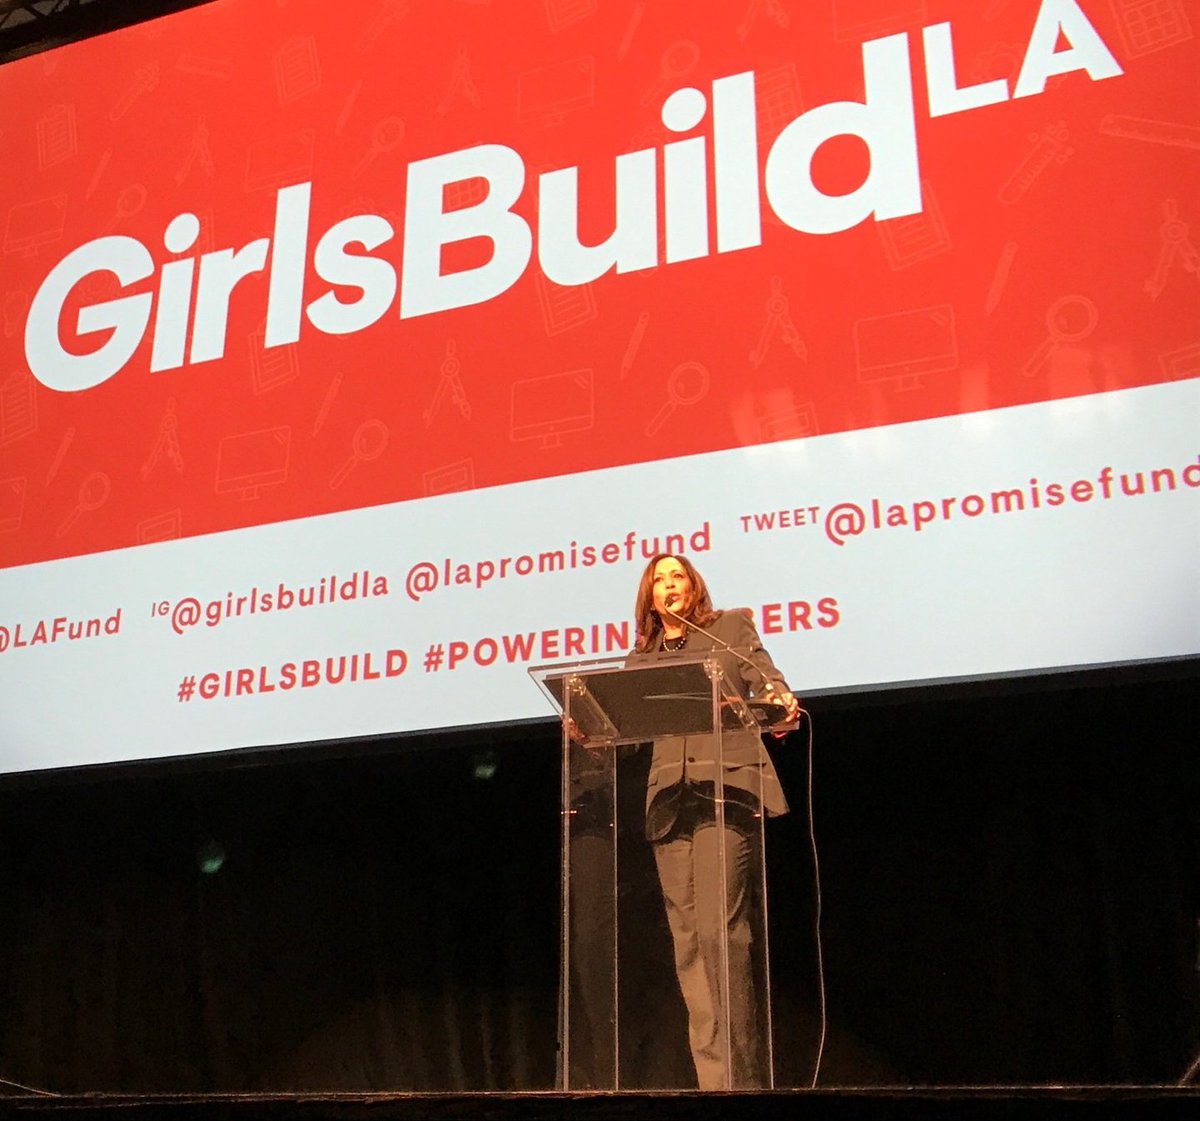 'What makes this day so powerful is that you are all here together. As unique and special as you are, you're also part of a community of young women who share your dreams.' Words of wisdom from @SenKamalaHarris #GirlsBuild #PowerInNumbers